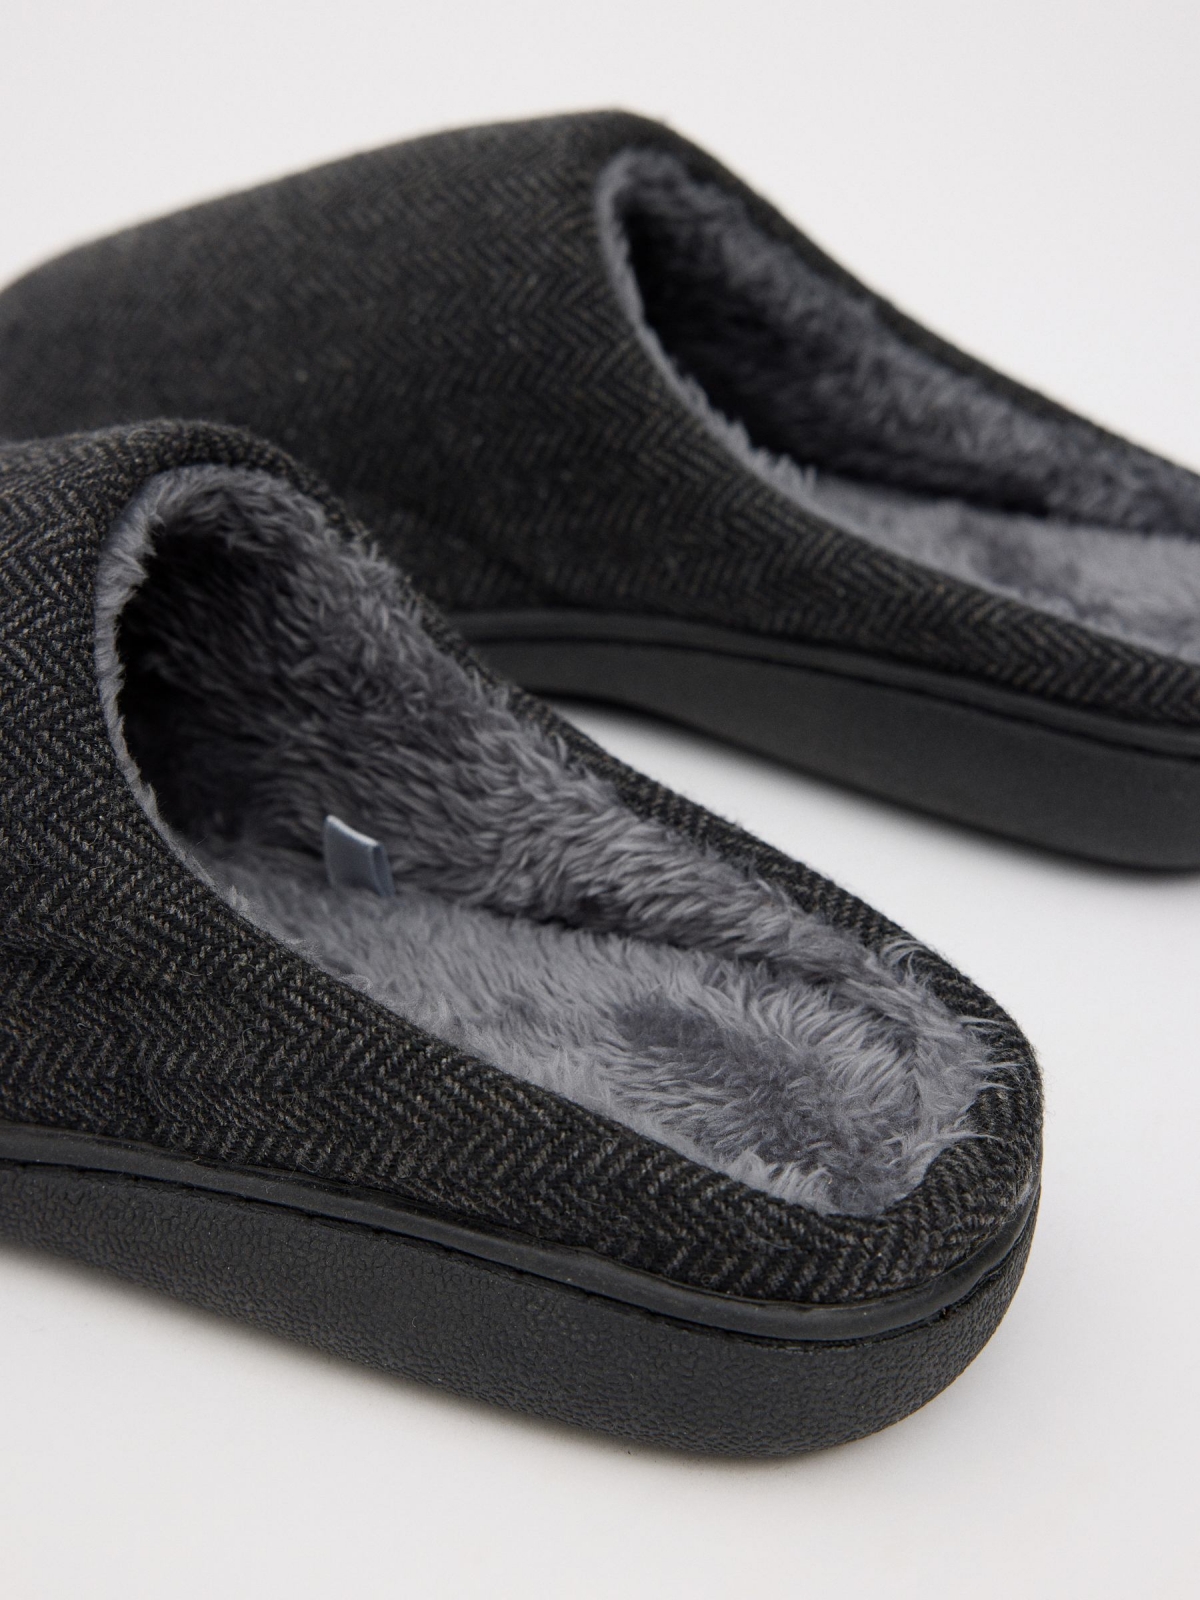 Fur lined home slippers dark grey detail view